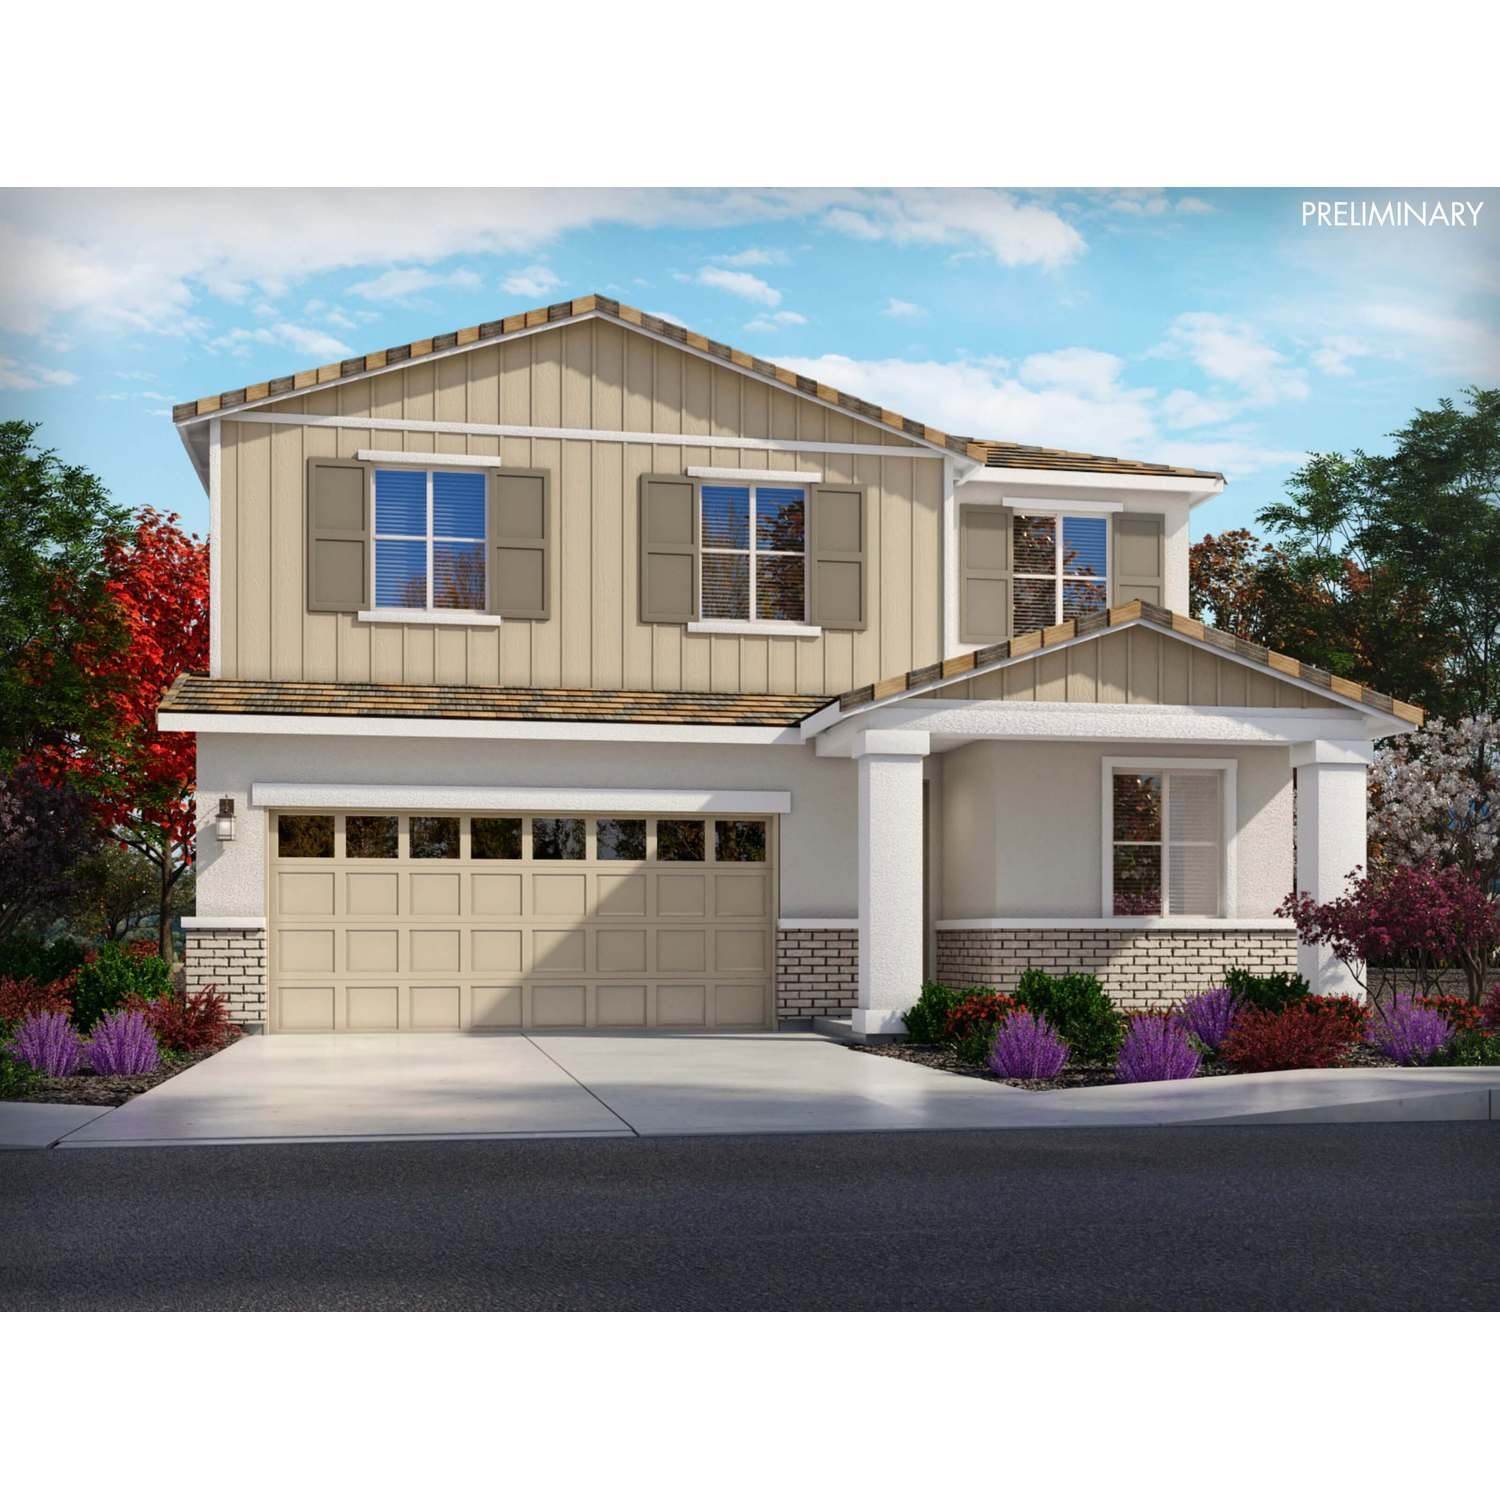 Single Family for Sale at Winters, CA 95694